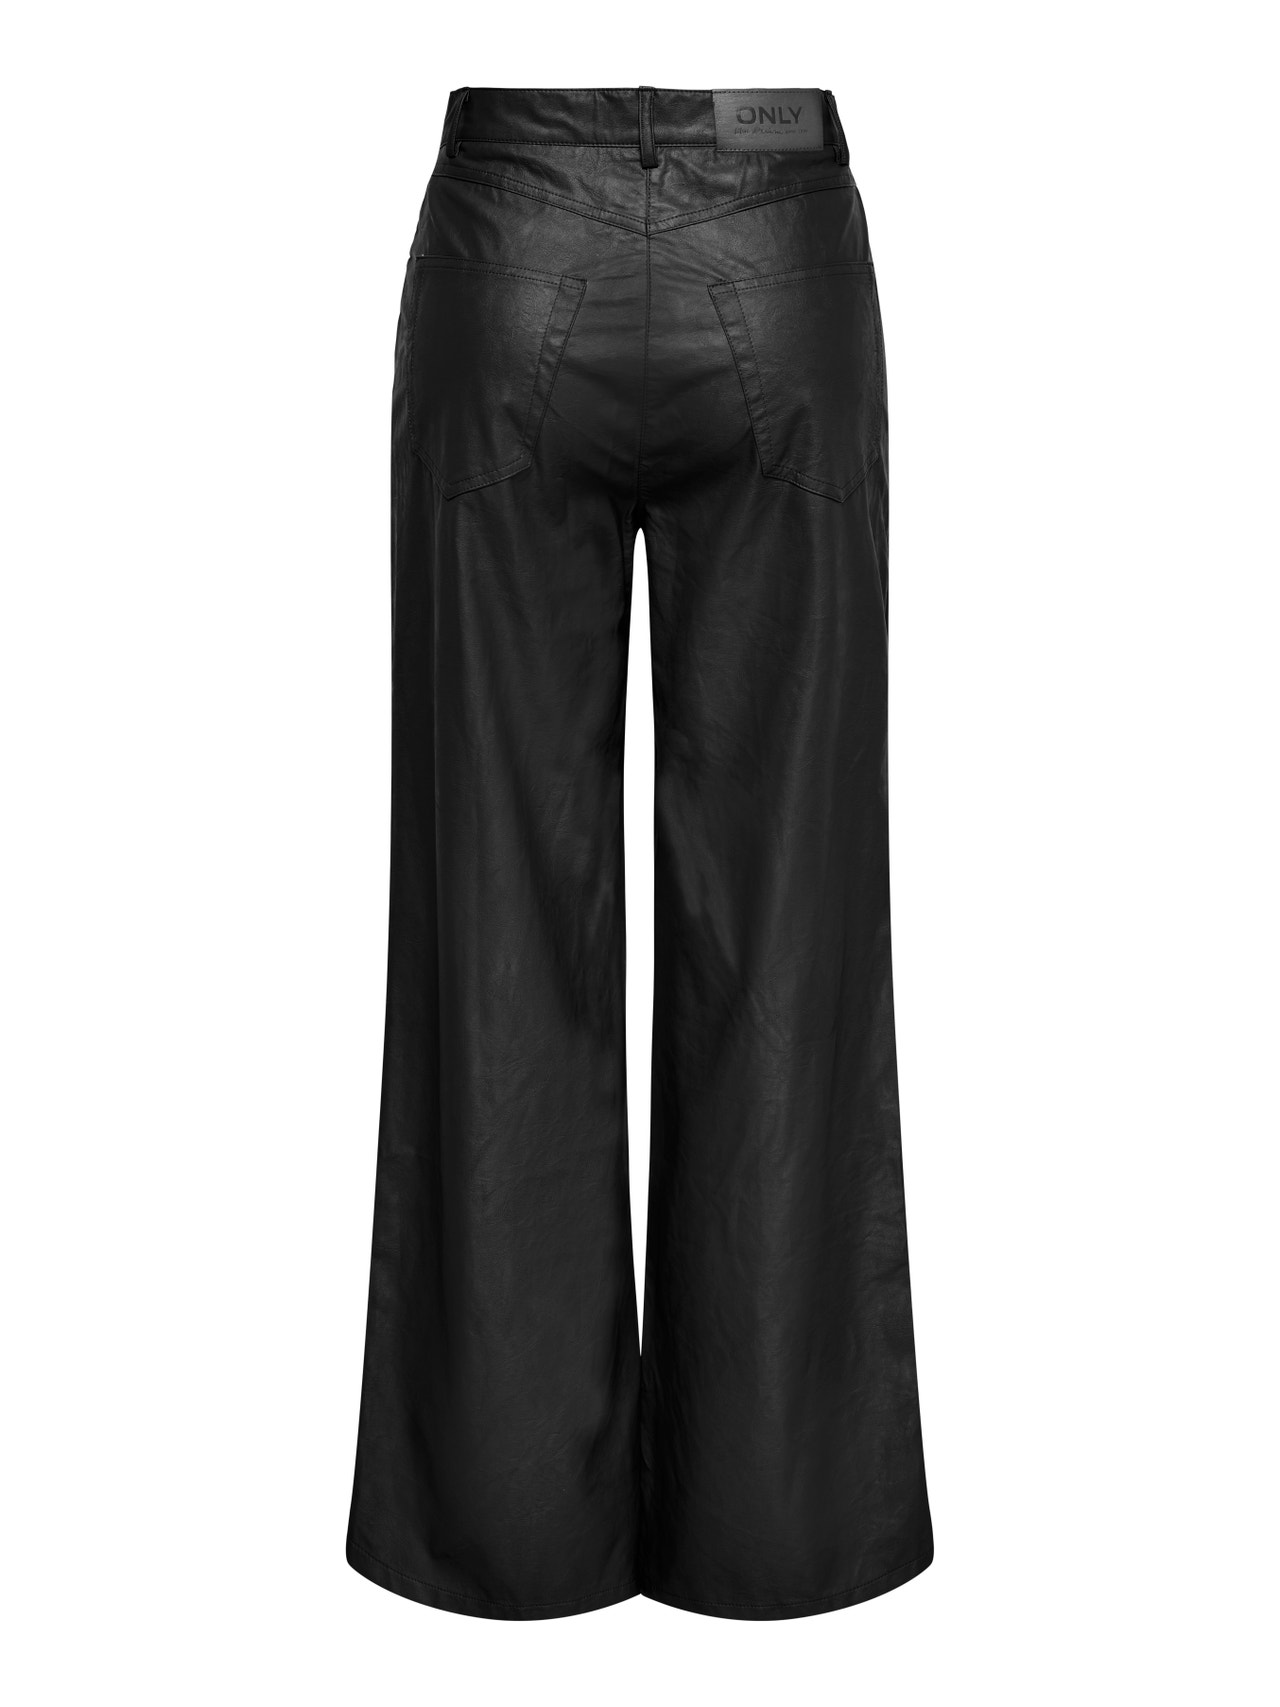 ONLY Normal geschnitten Hohe Taille Hose -Black - 15304258